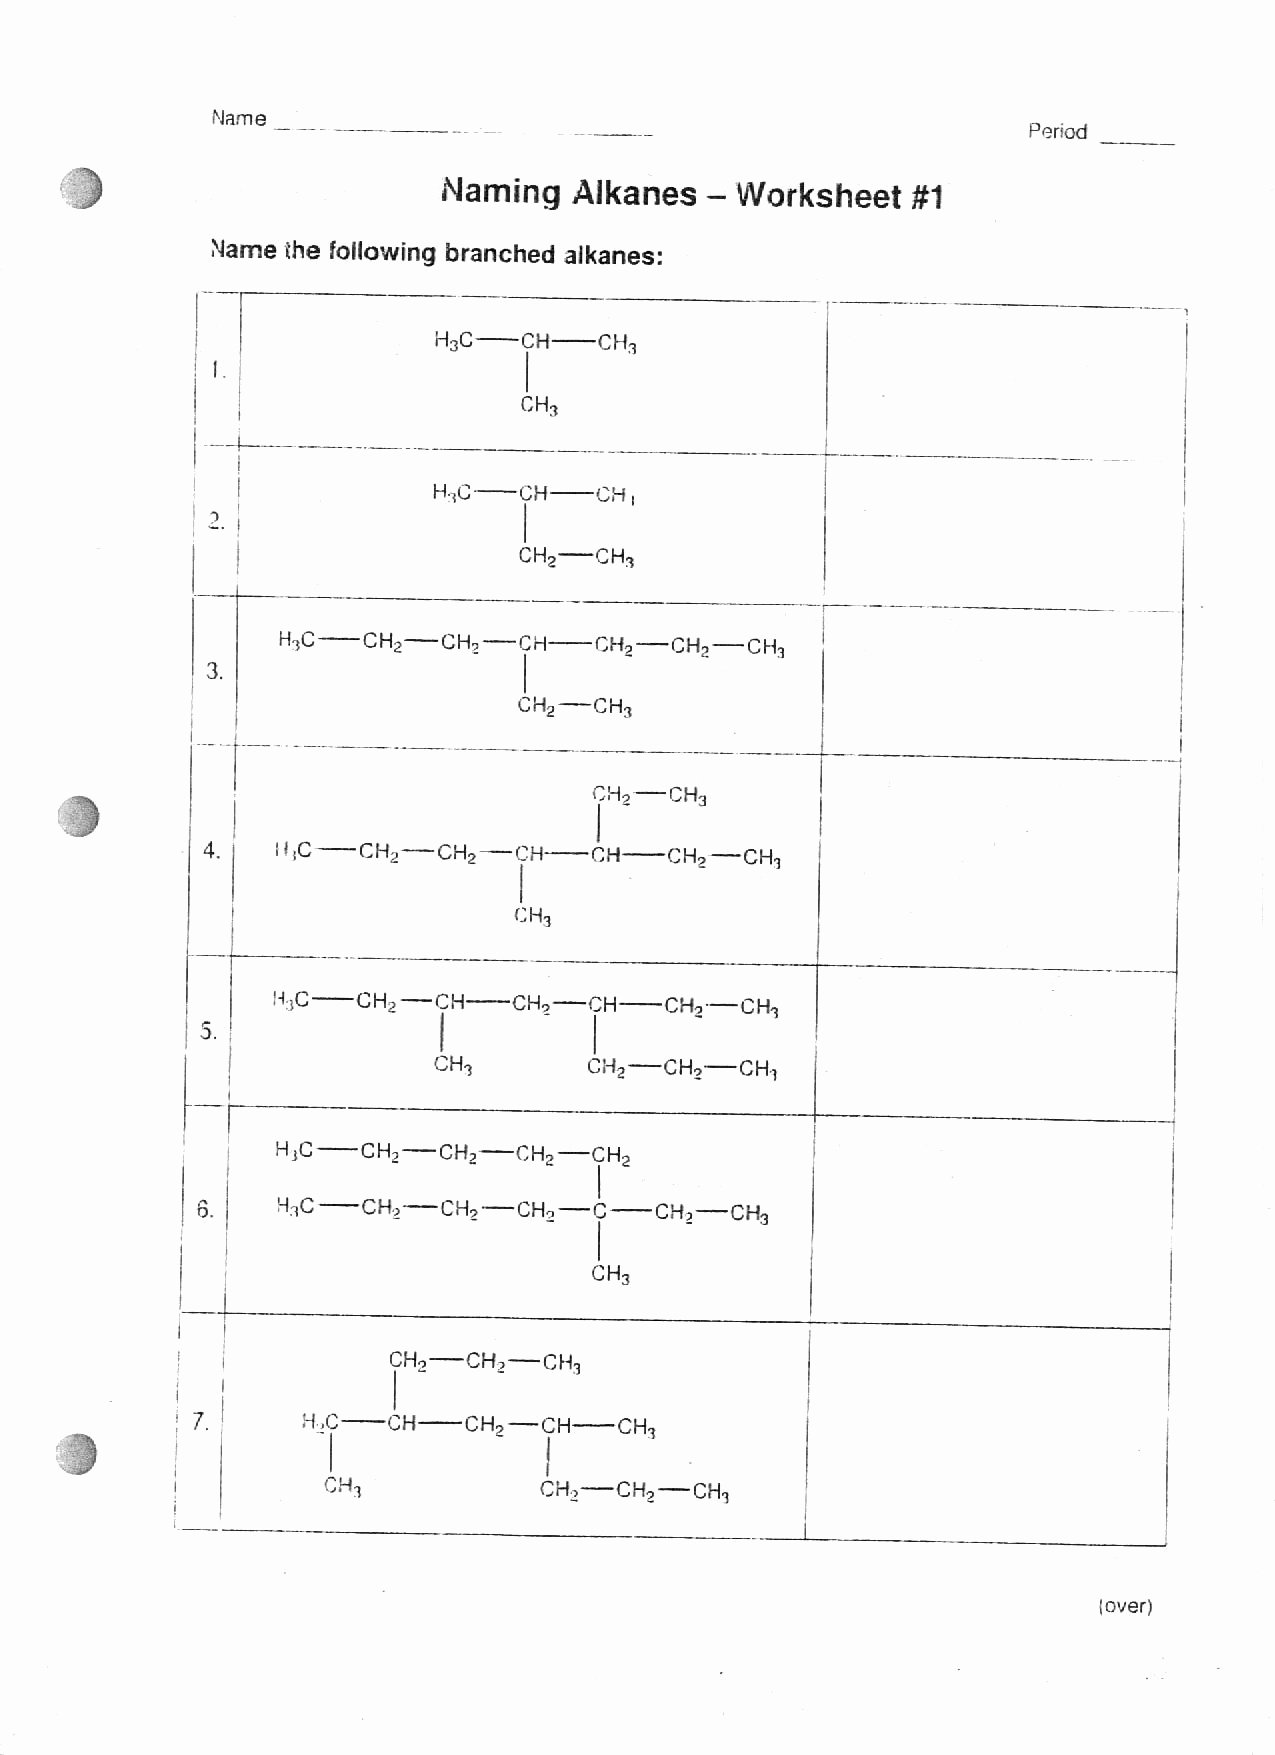 50-organic-chemistry-worksheet-with-answers